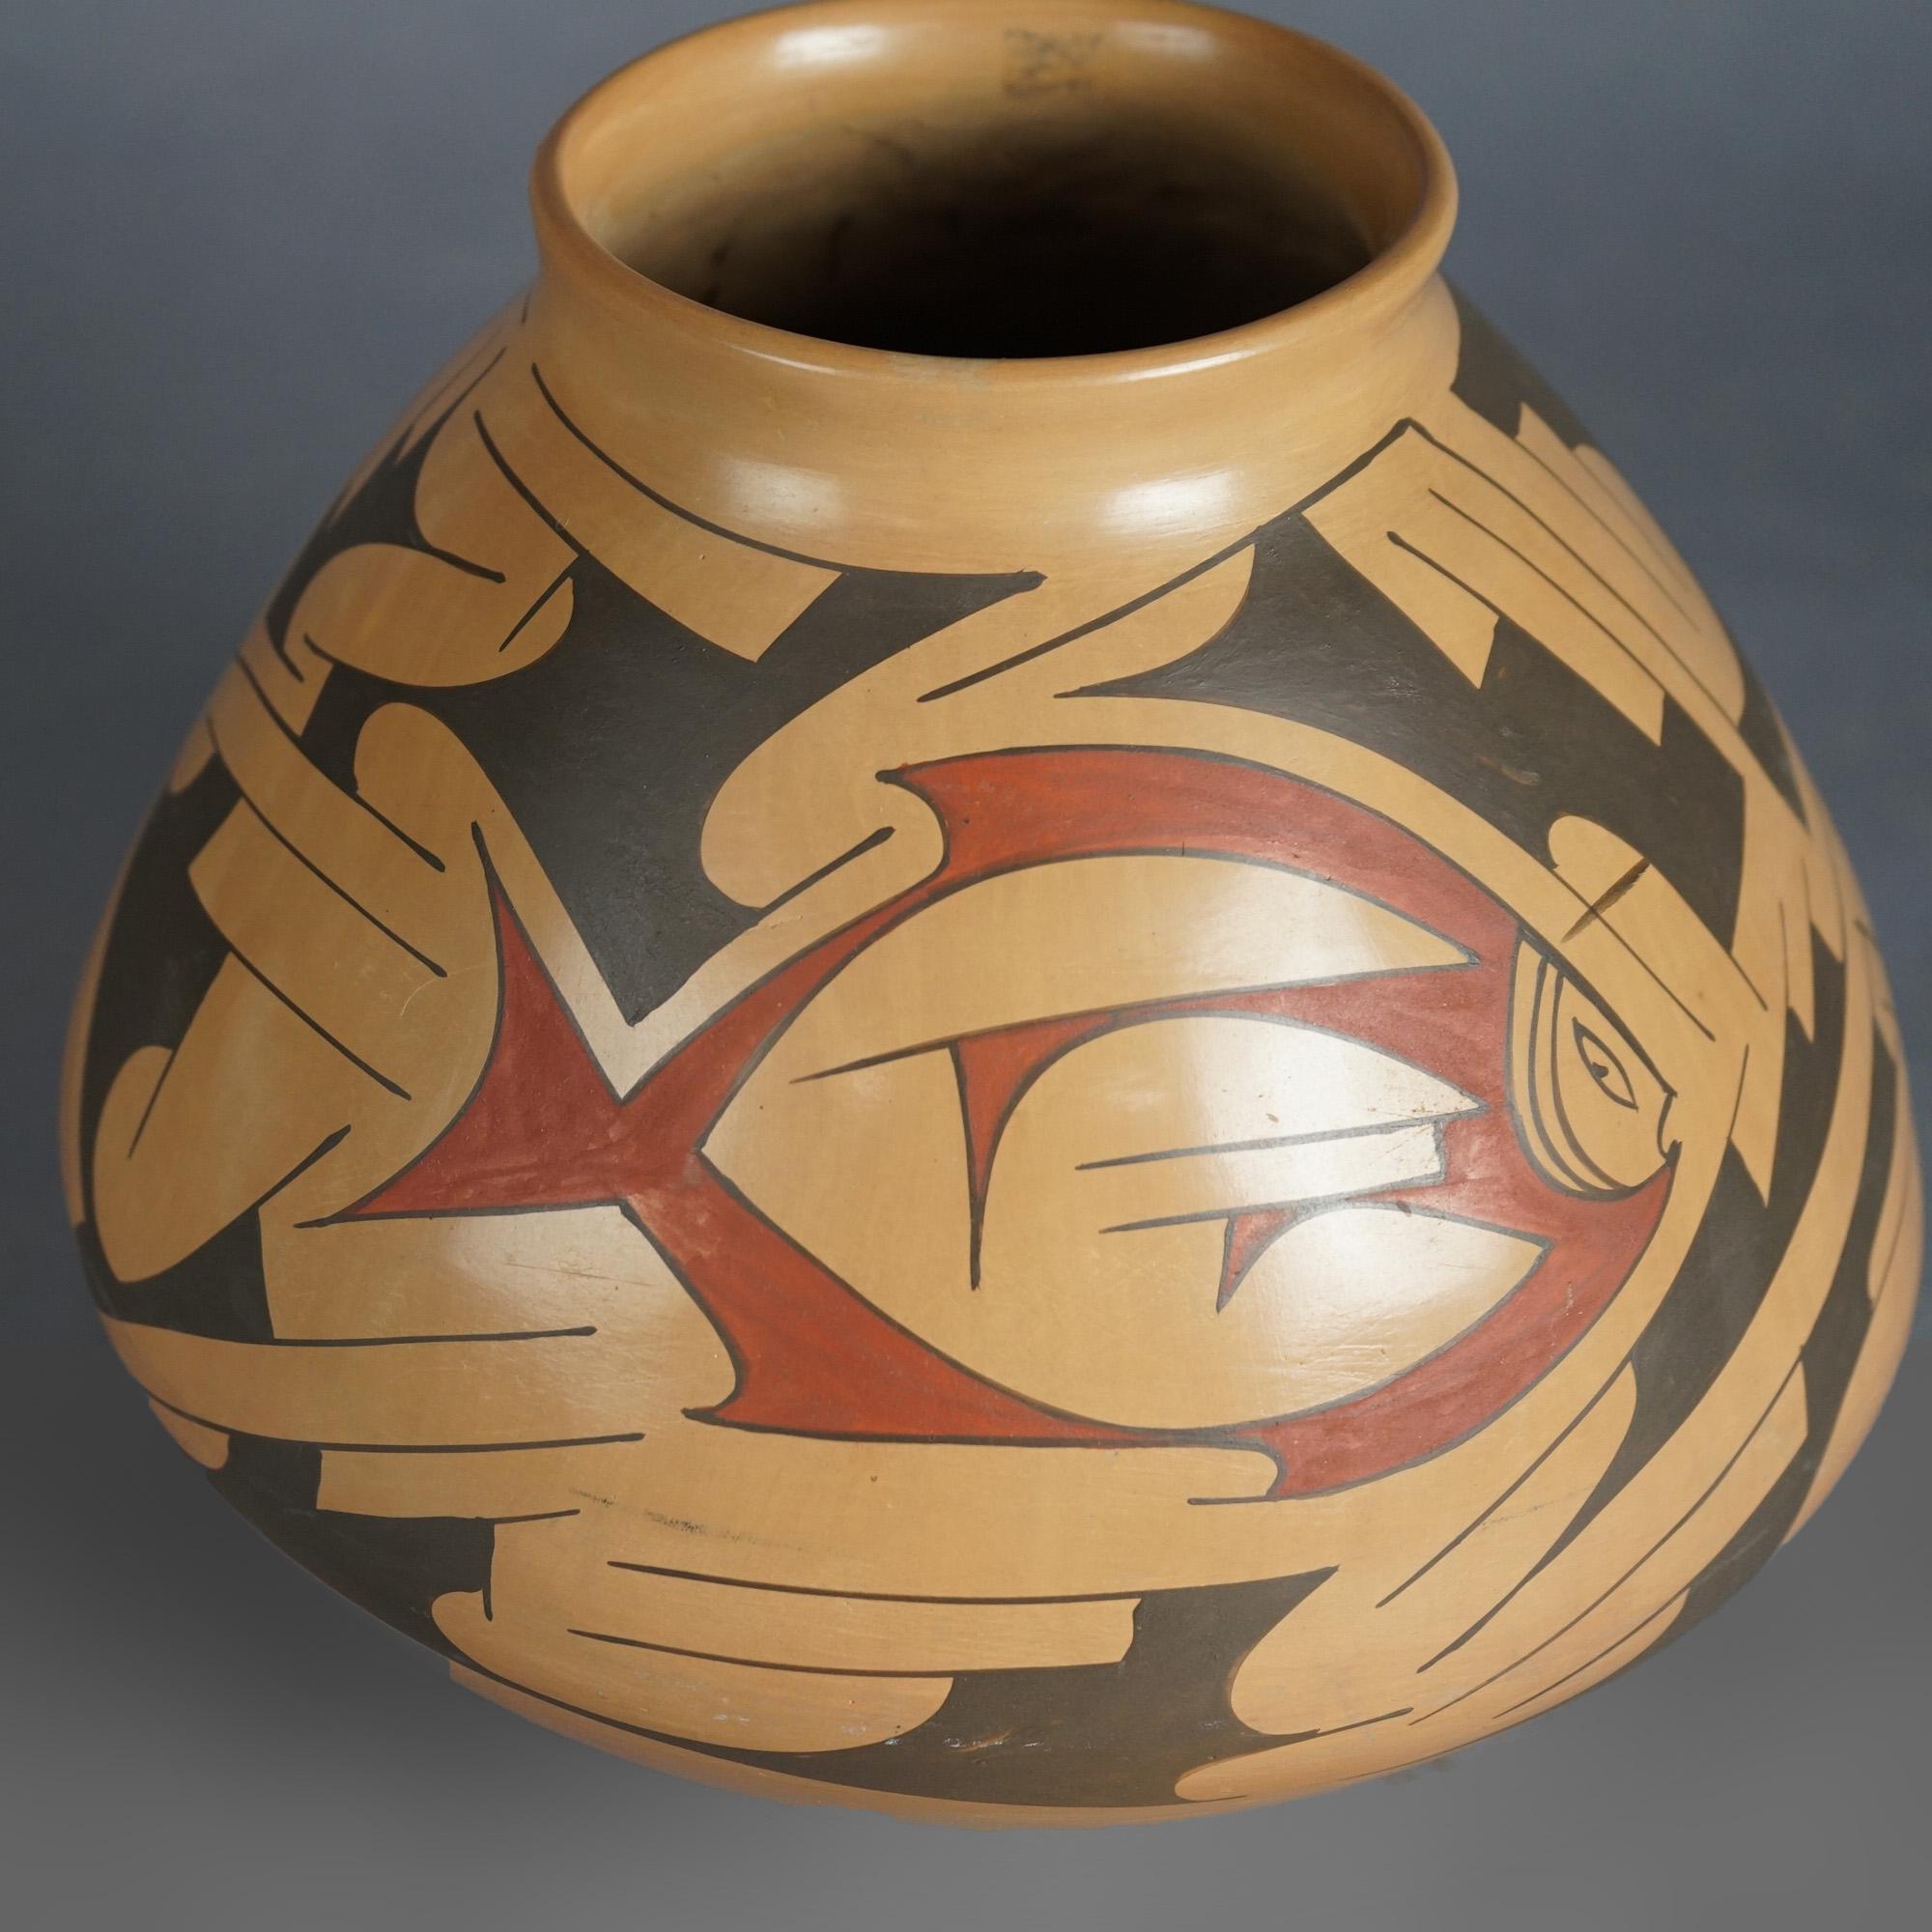 American Indian Hand Painted Pottery Olla Pot with Fish & Geometric Elements, 20thC

Measures- 9.75''H x 10''W x 10''D